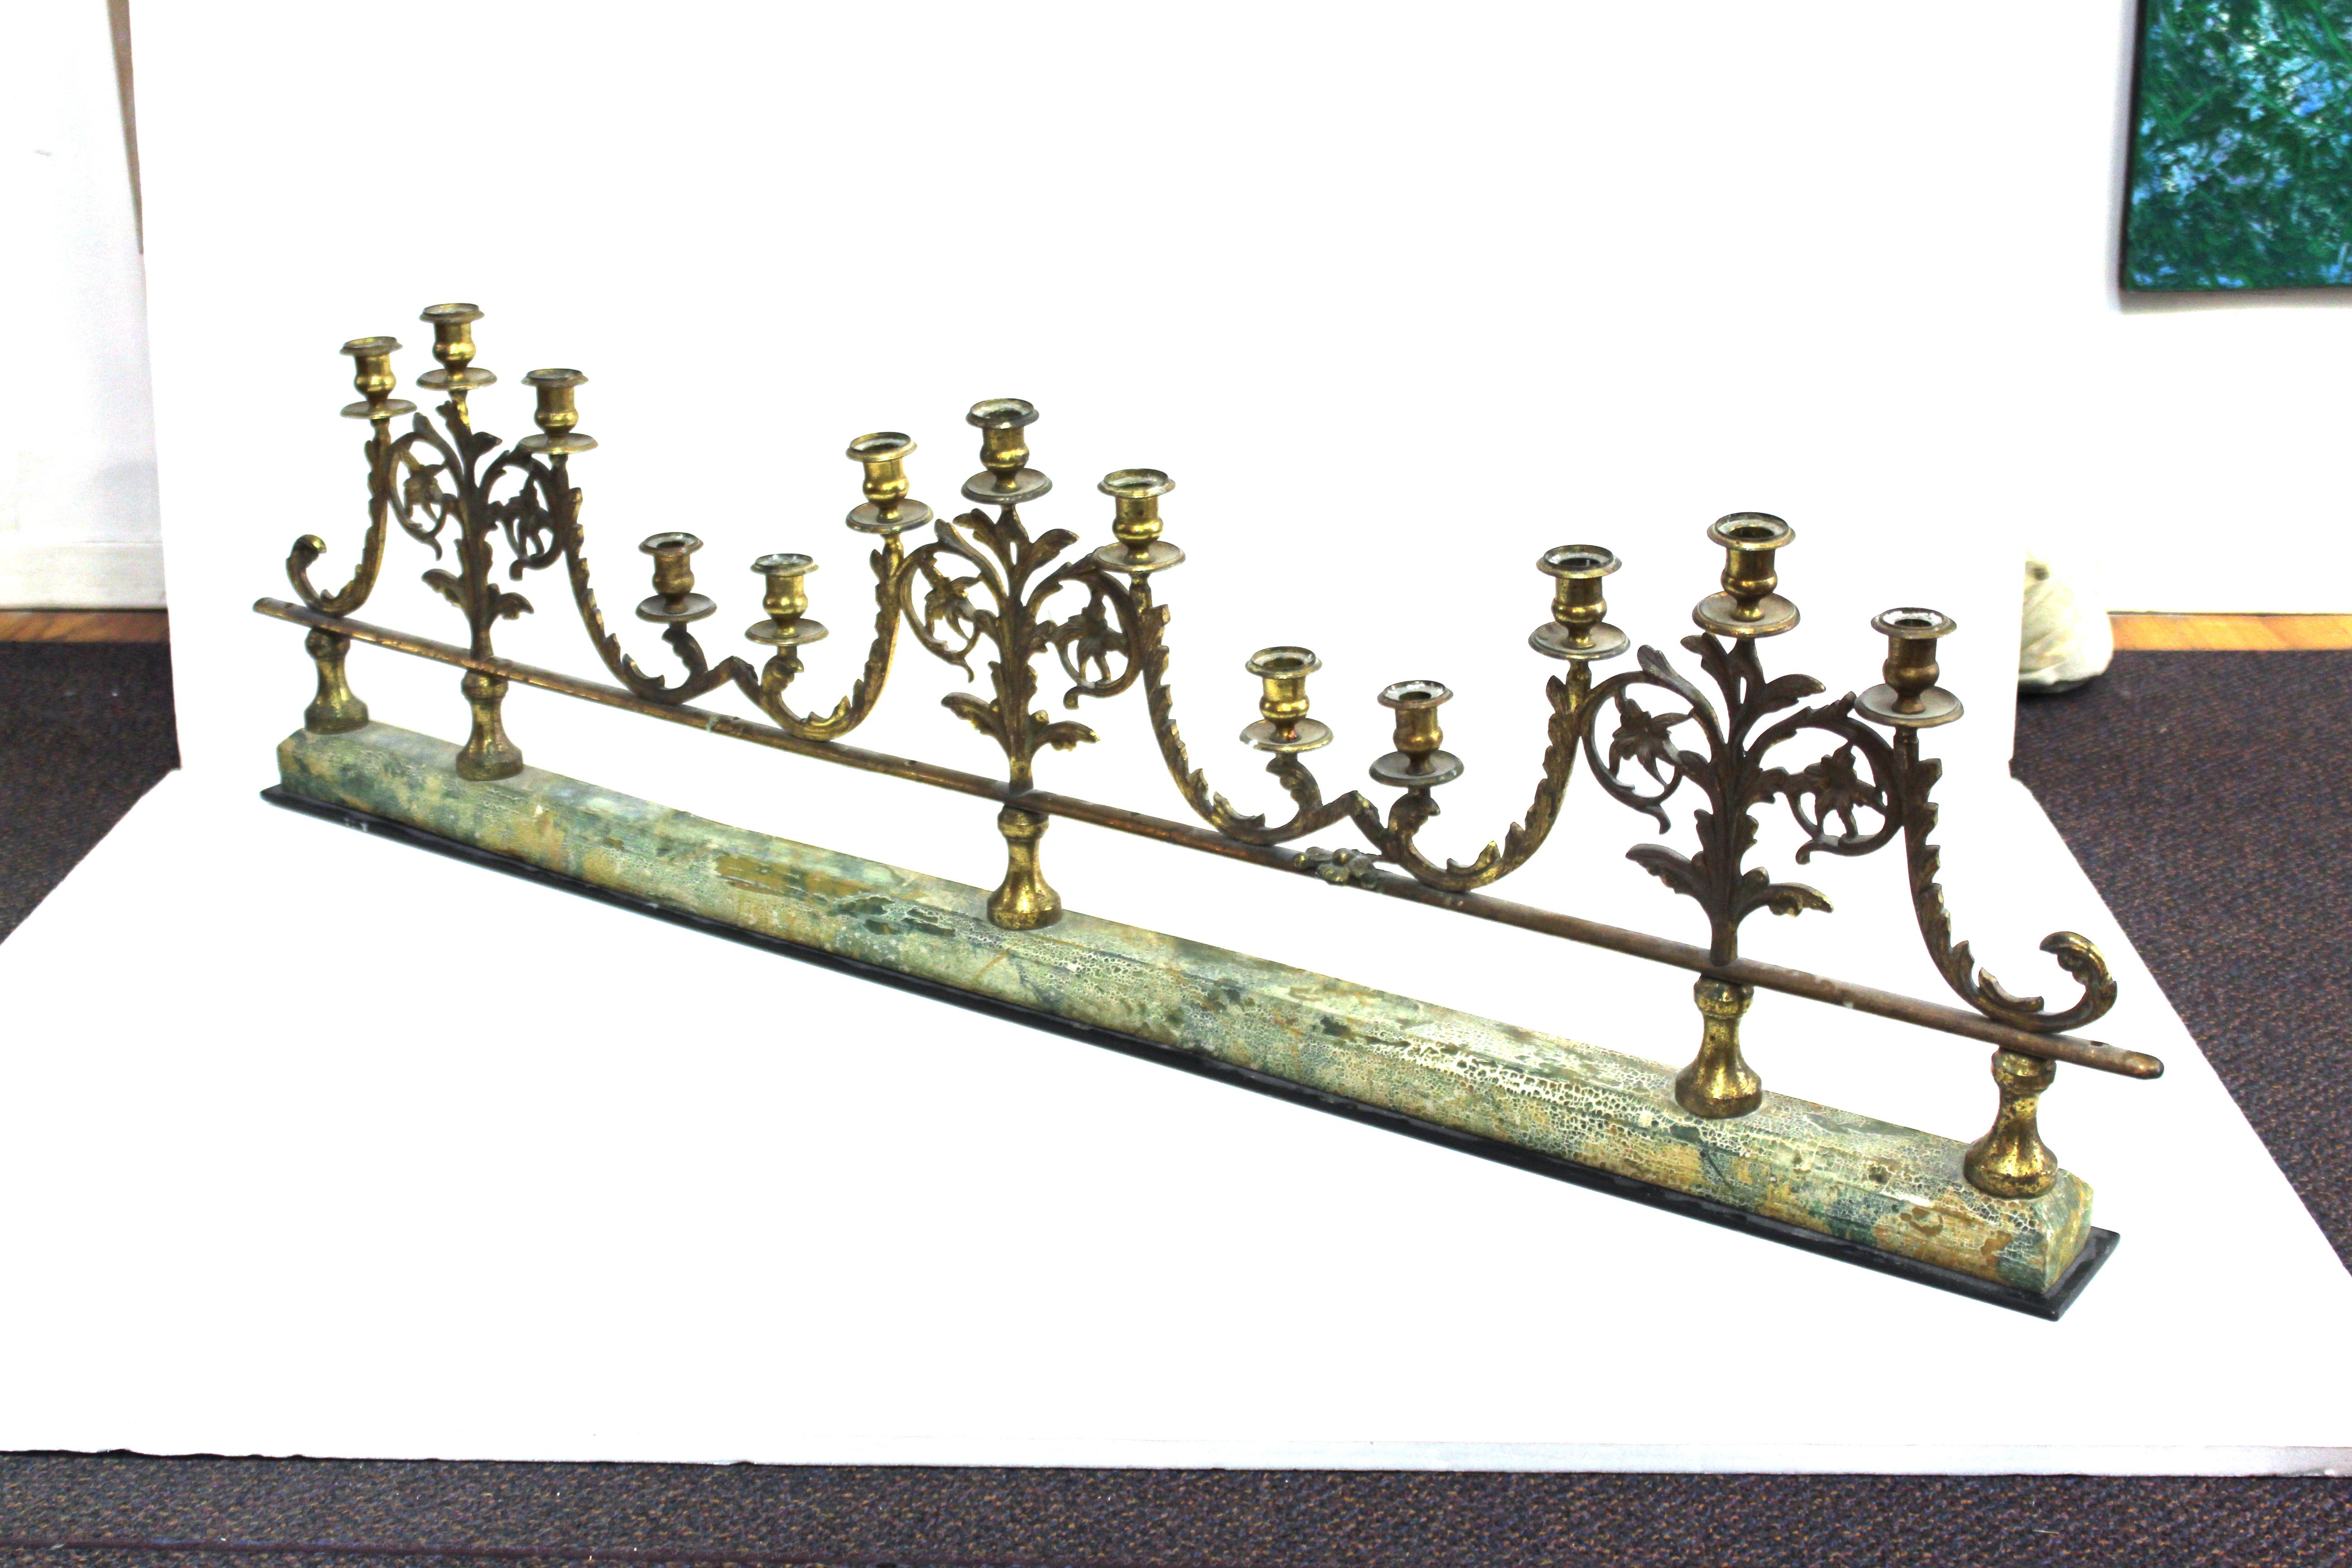 Victorian candelabra railing featuring three gilt metal candelabras with a total of fourteen candleholders. The candelabras are joined together at the extremities and mounted on a long painted wooden base. In great vintage condition with